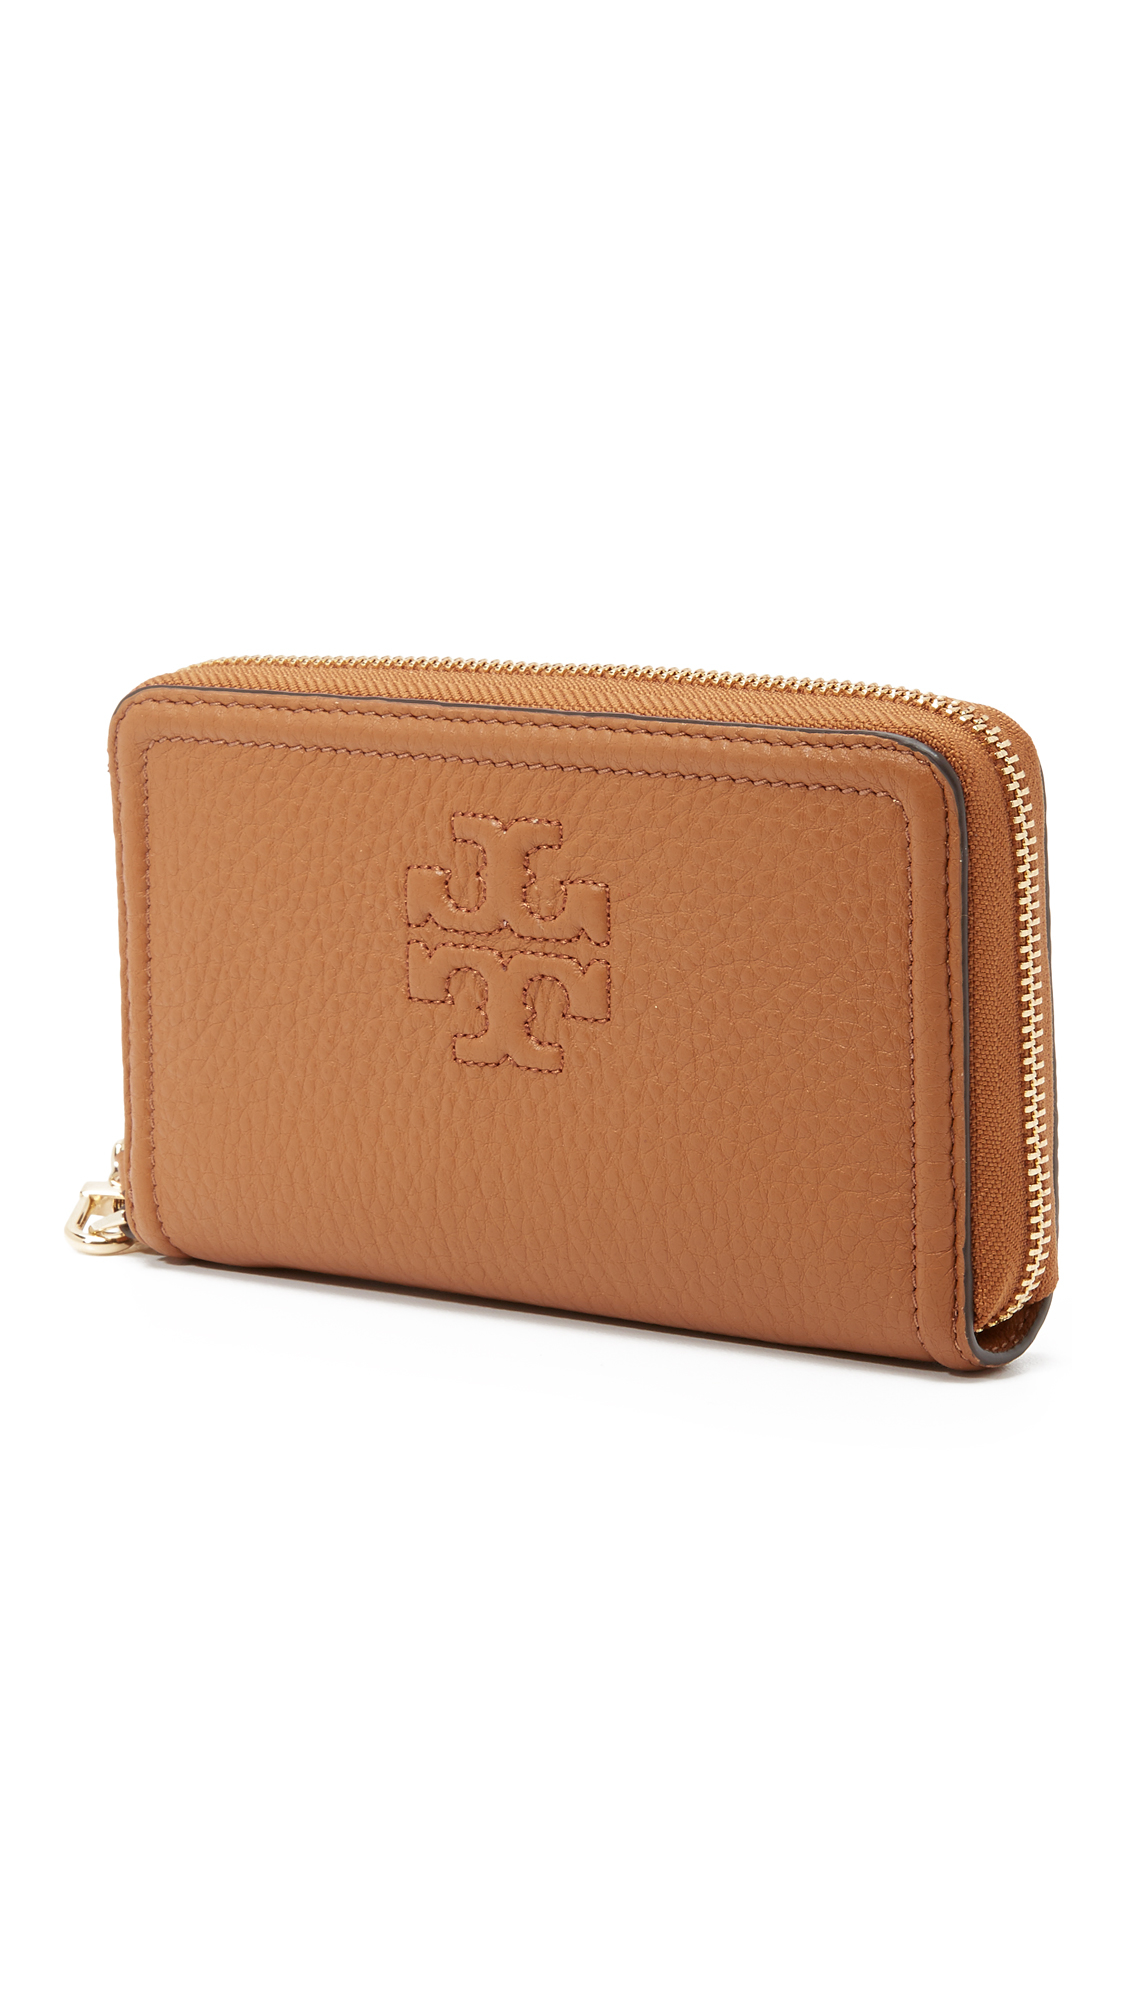 Tory Burch Leather Thea Zip Around Wristlet Wallet in Brown - Lyst